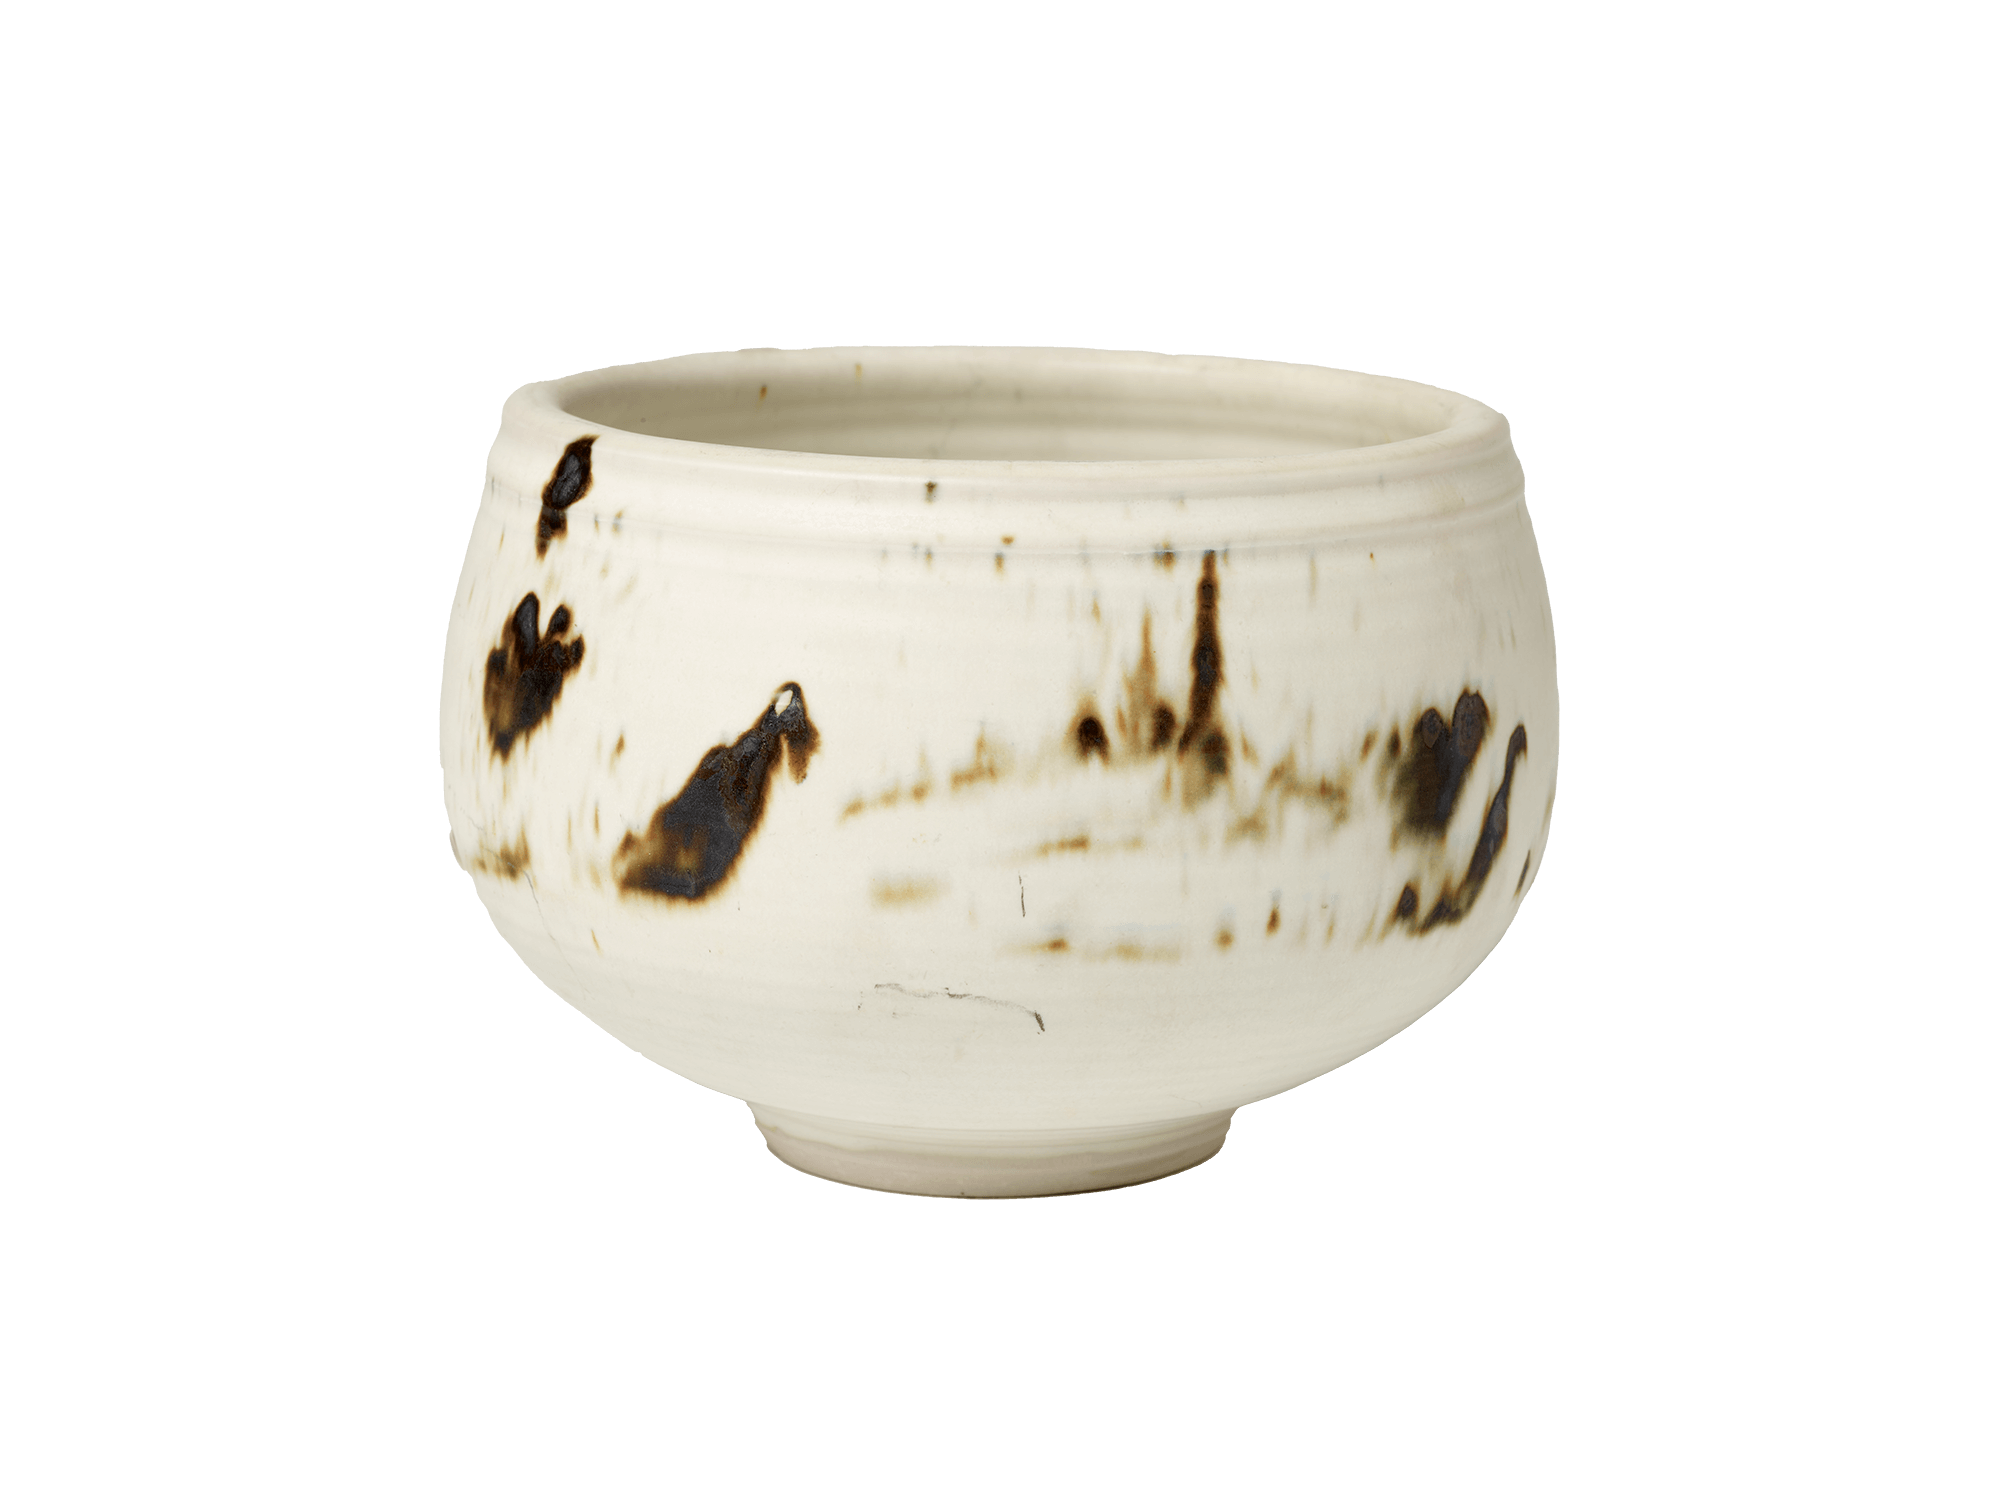 /White%20bowl%20on%20a%20small%20circular%20foot%20with%20irregular%20brown%20marks.%20